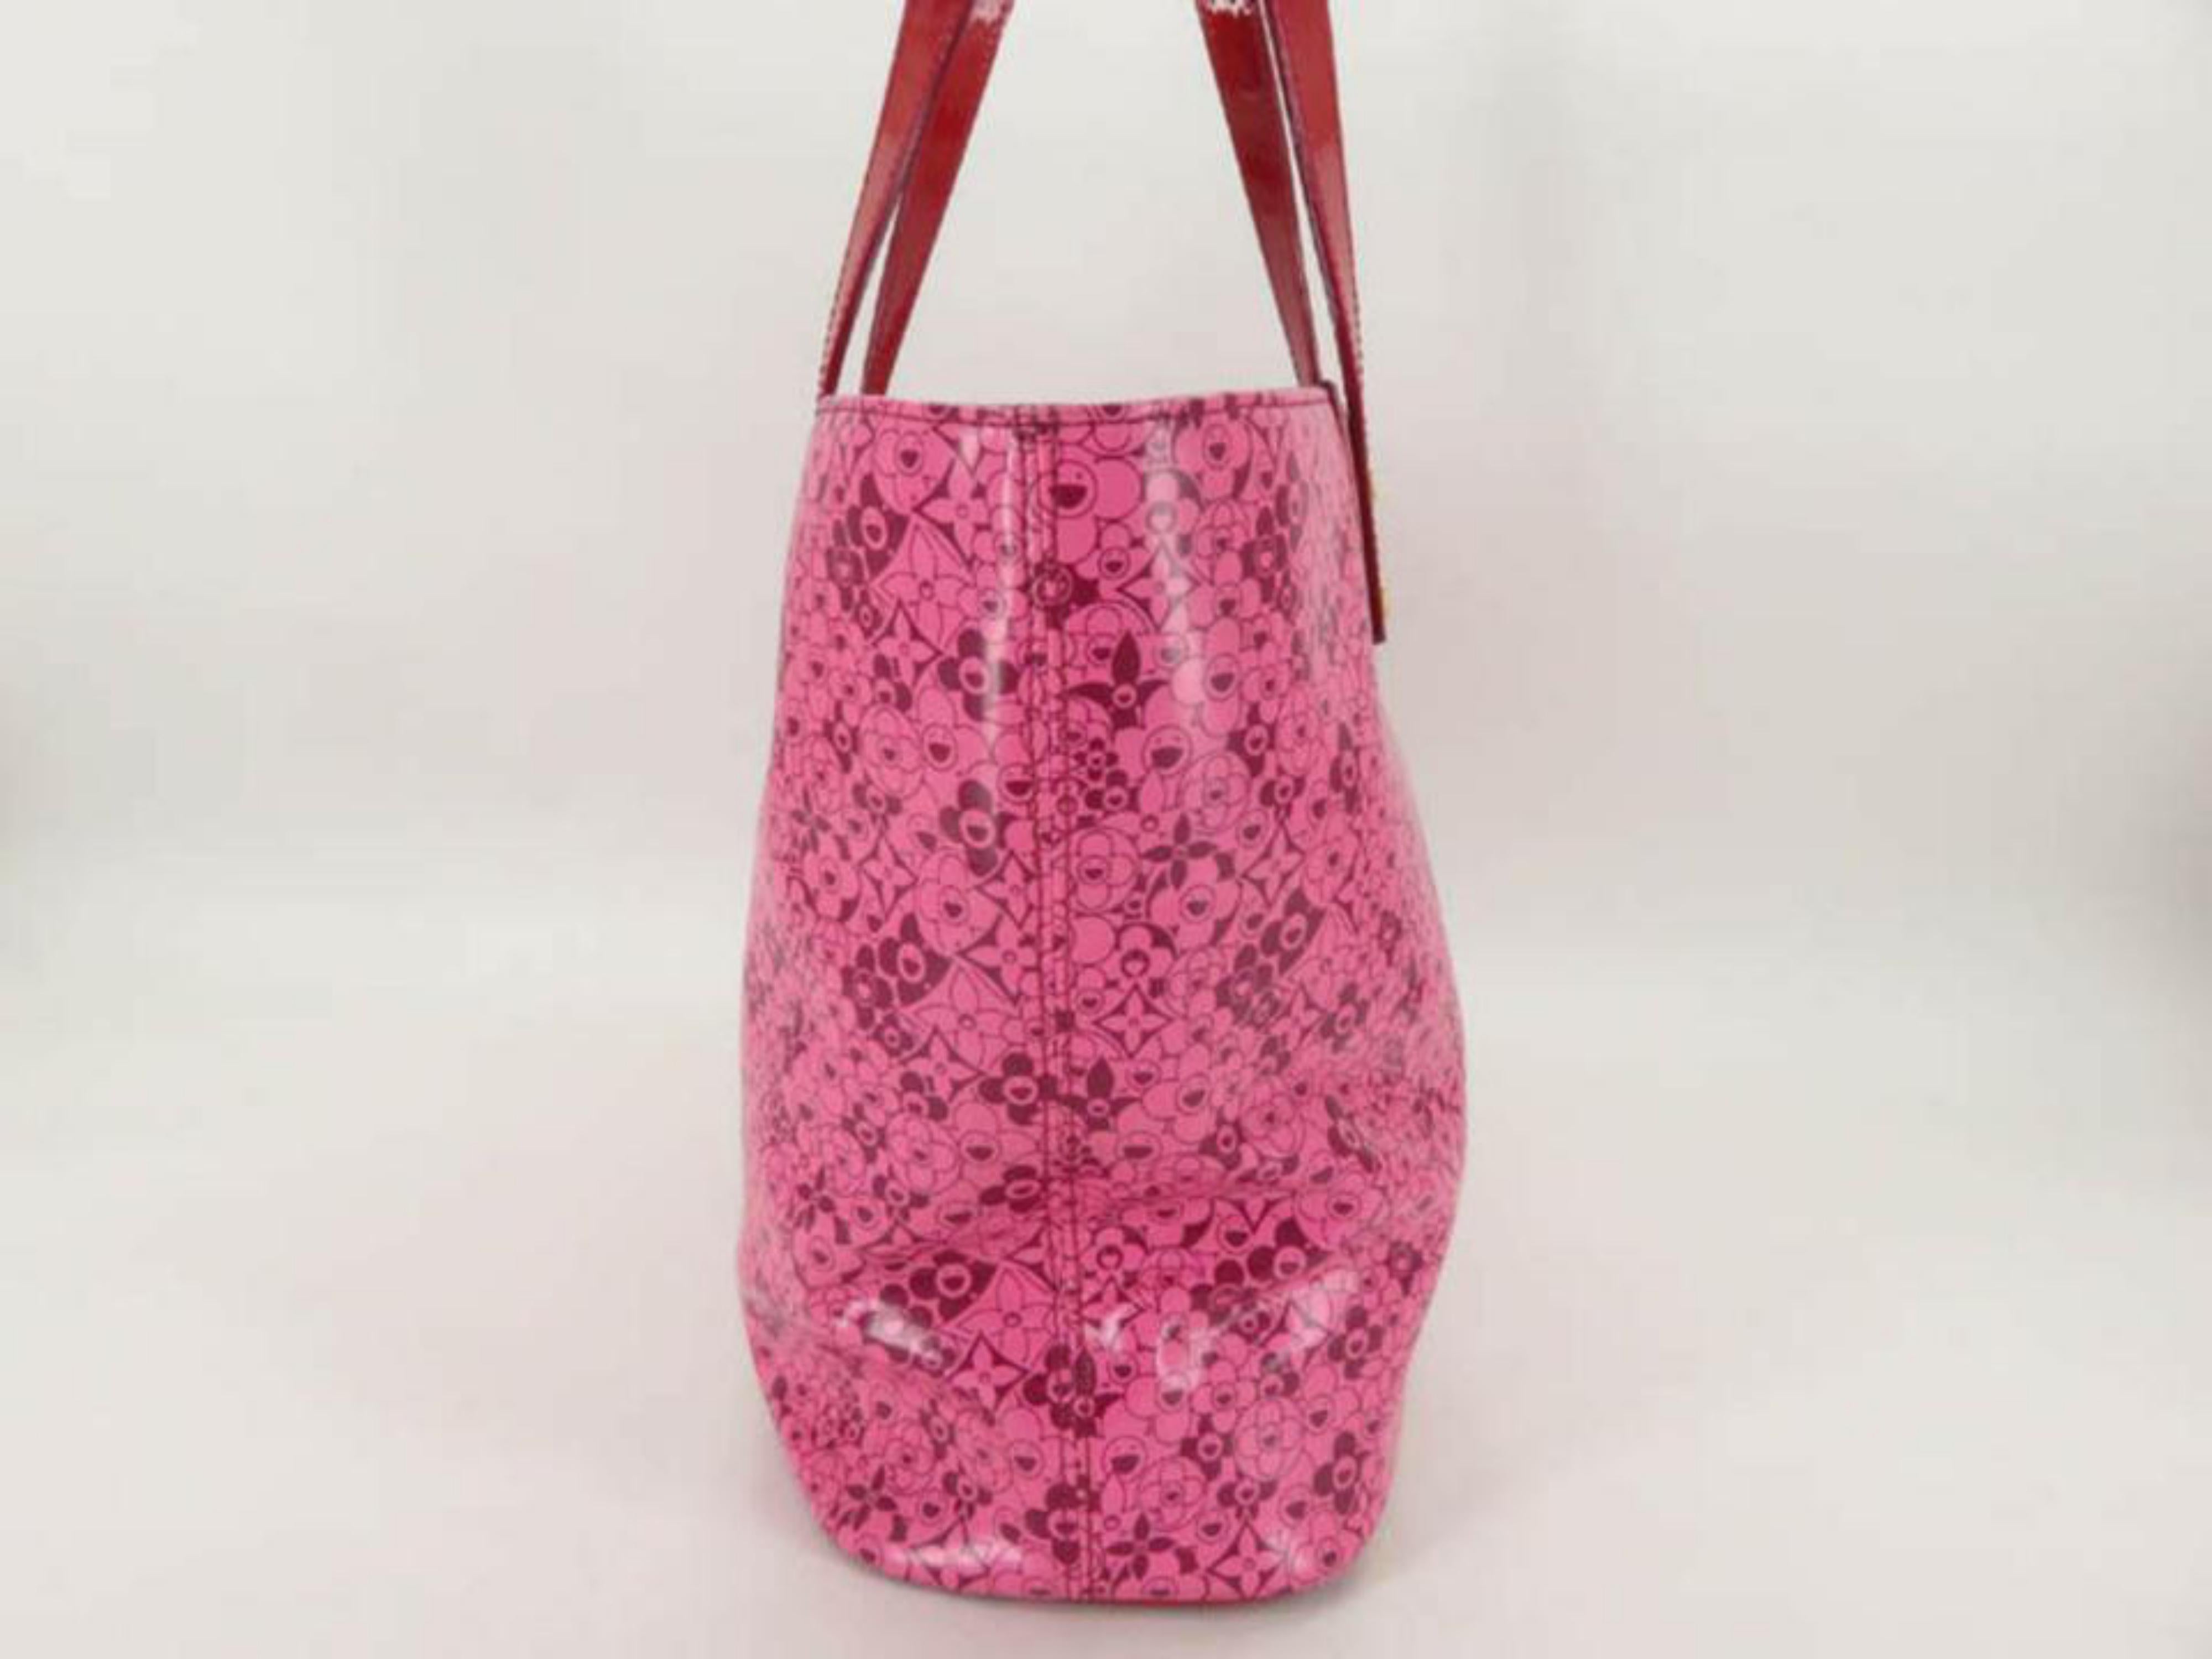 Louis Vuitton Murakami Cosmic Blossom Pm 870012 Pink Leather Tote For Sale 5